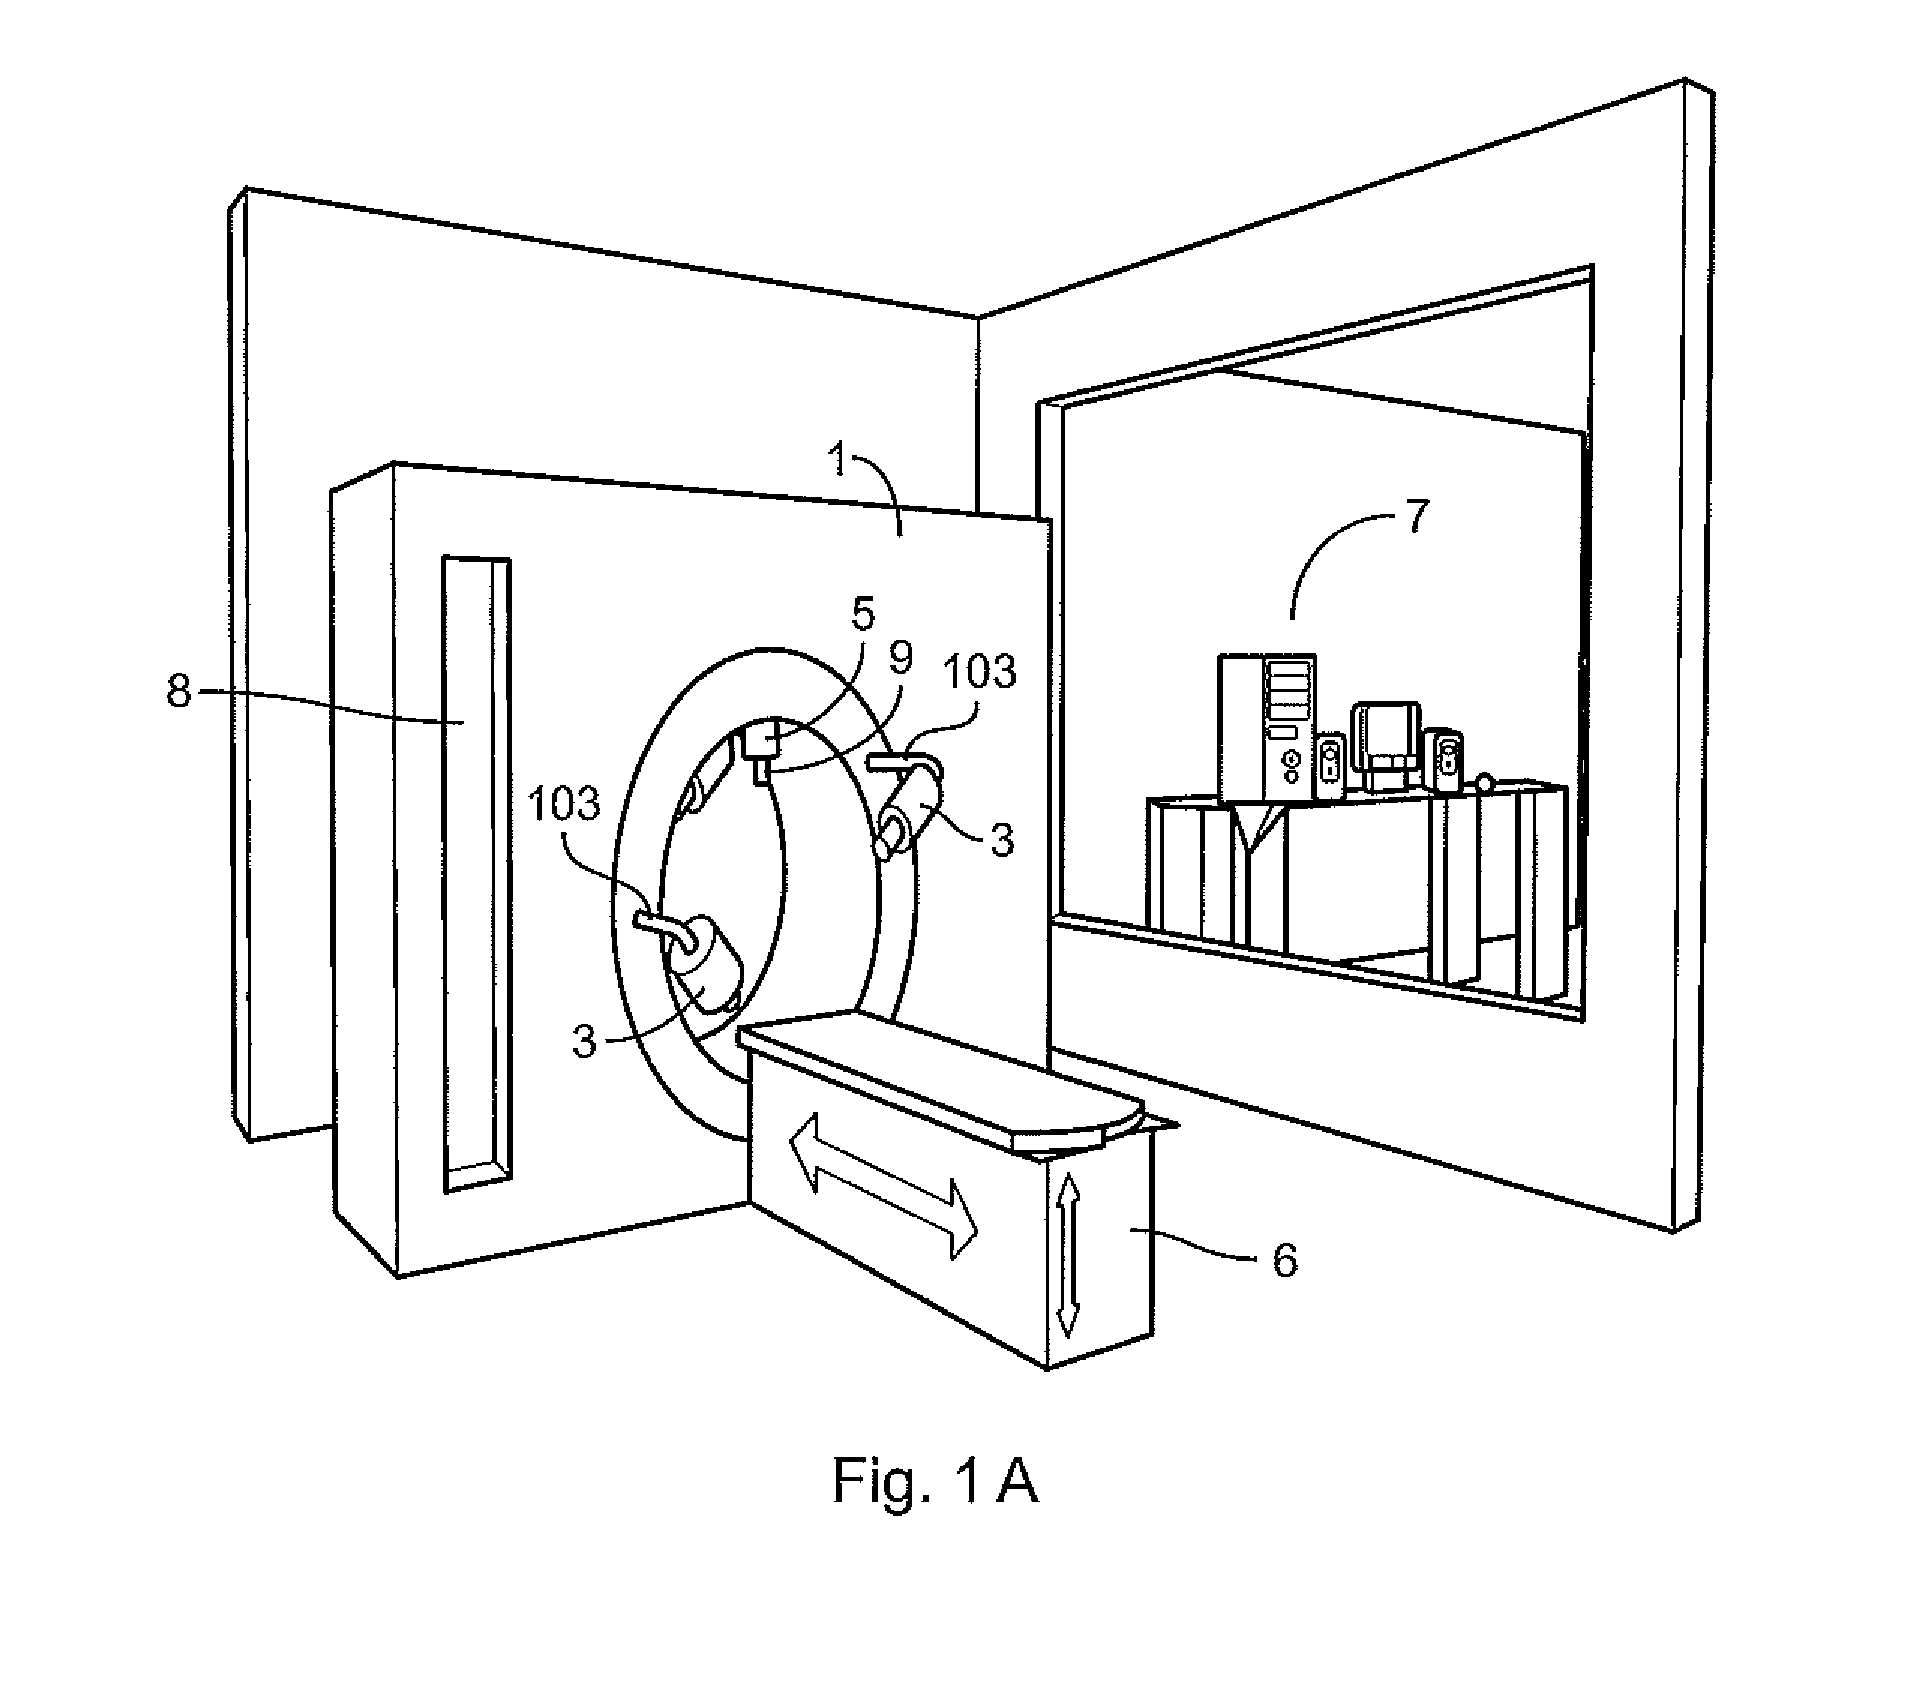 Apparatus and method to carry out image guided radiotherapy with kilo-voltage x-ray beams in the presence of a contrast agent